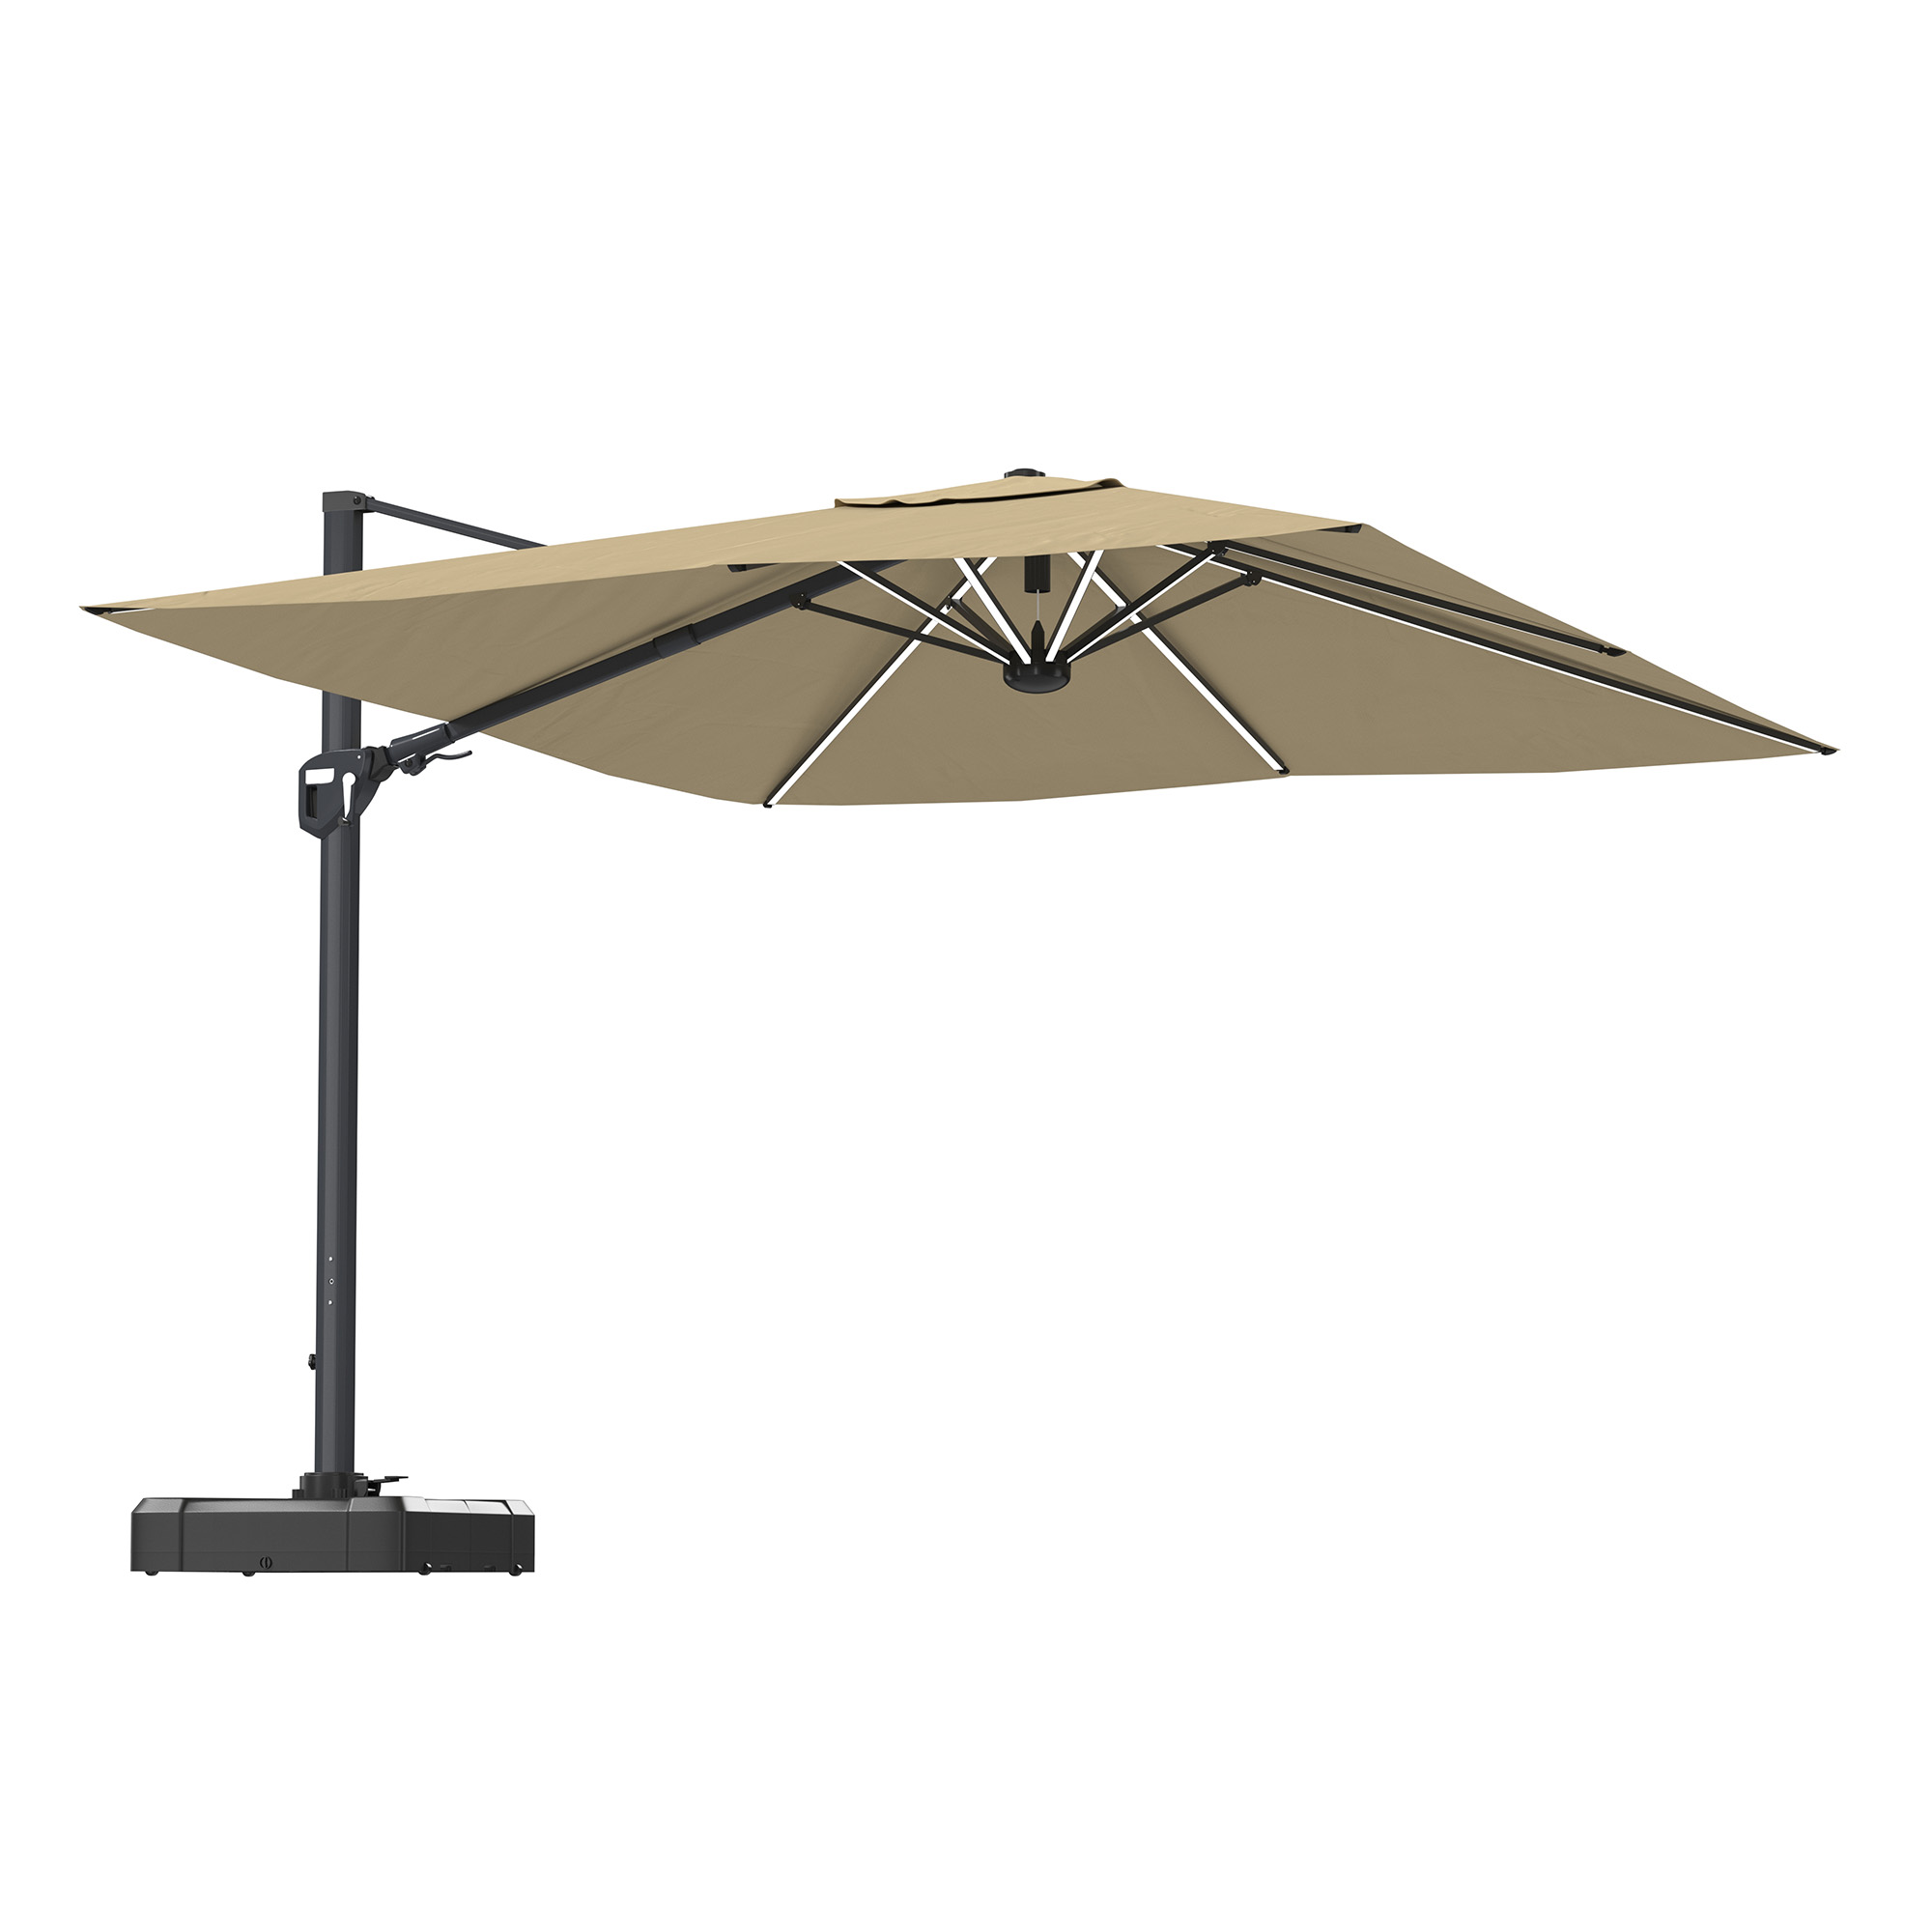 CASAINC 11FT Square Cantilever Patio Umbrella with LED Light (with Base)